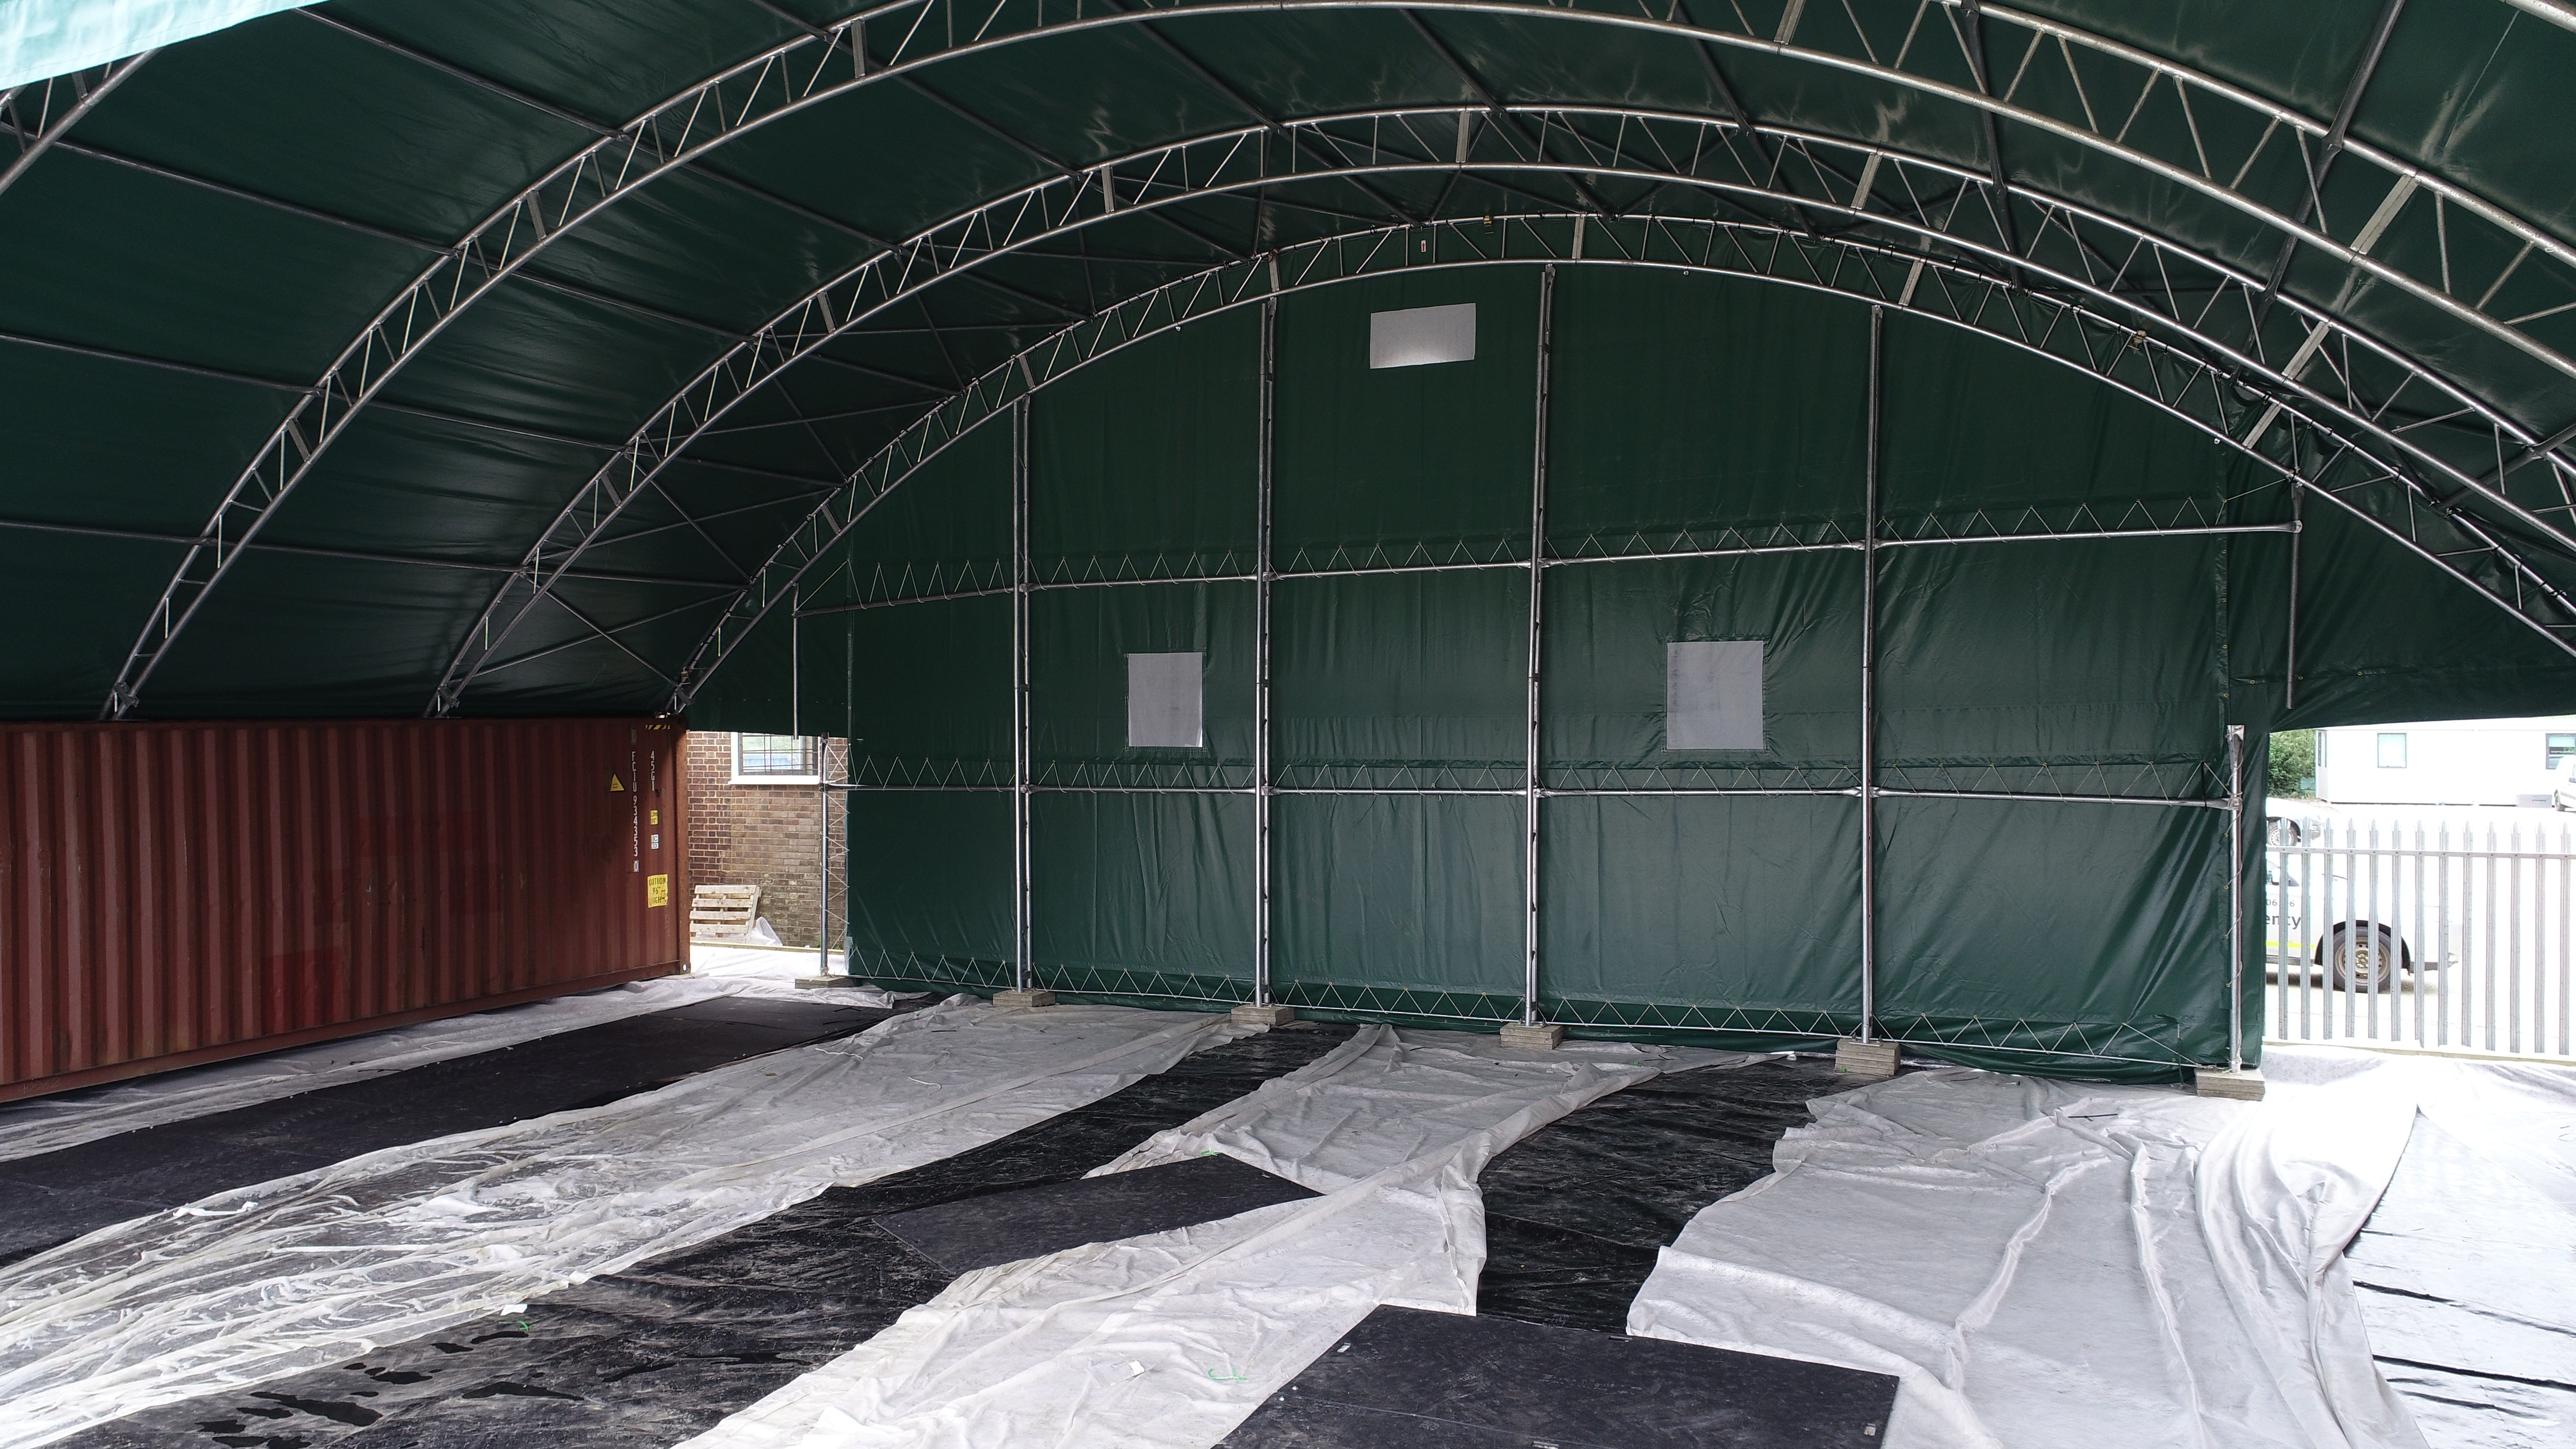 18m x 12m - Double Truss Container canopy - Closed back panel and half moon front panel Green